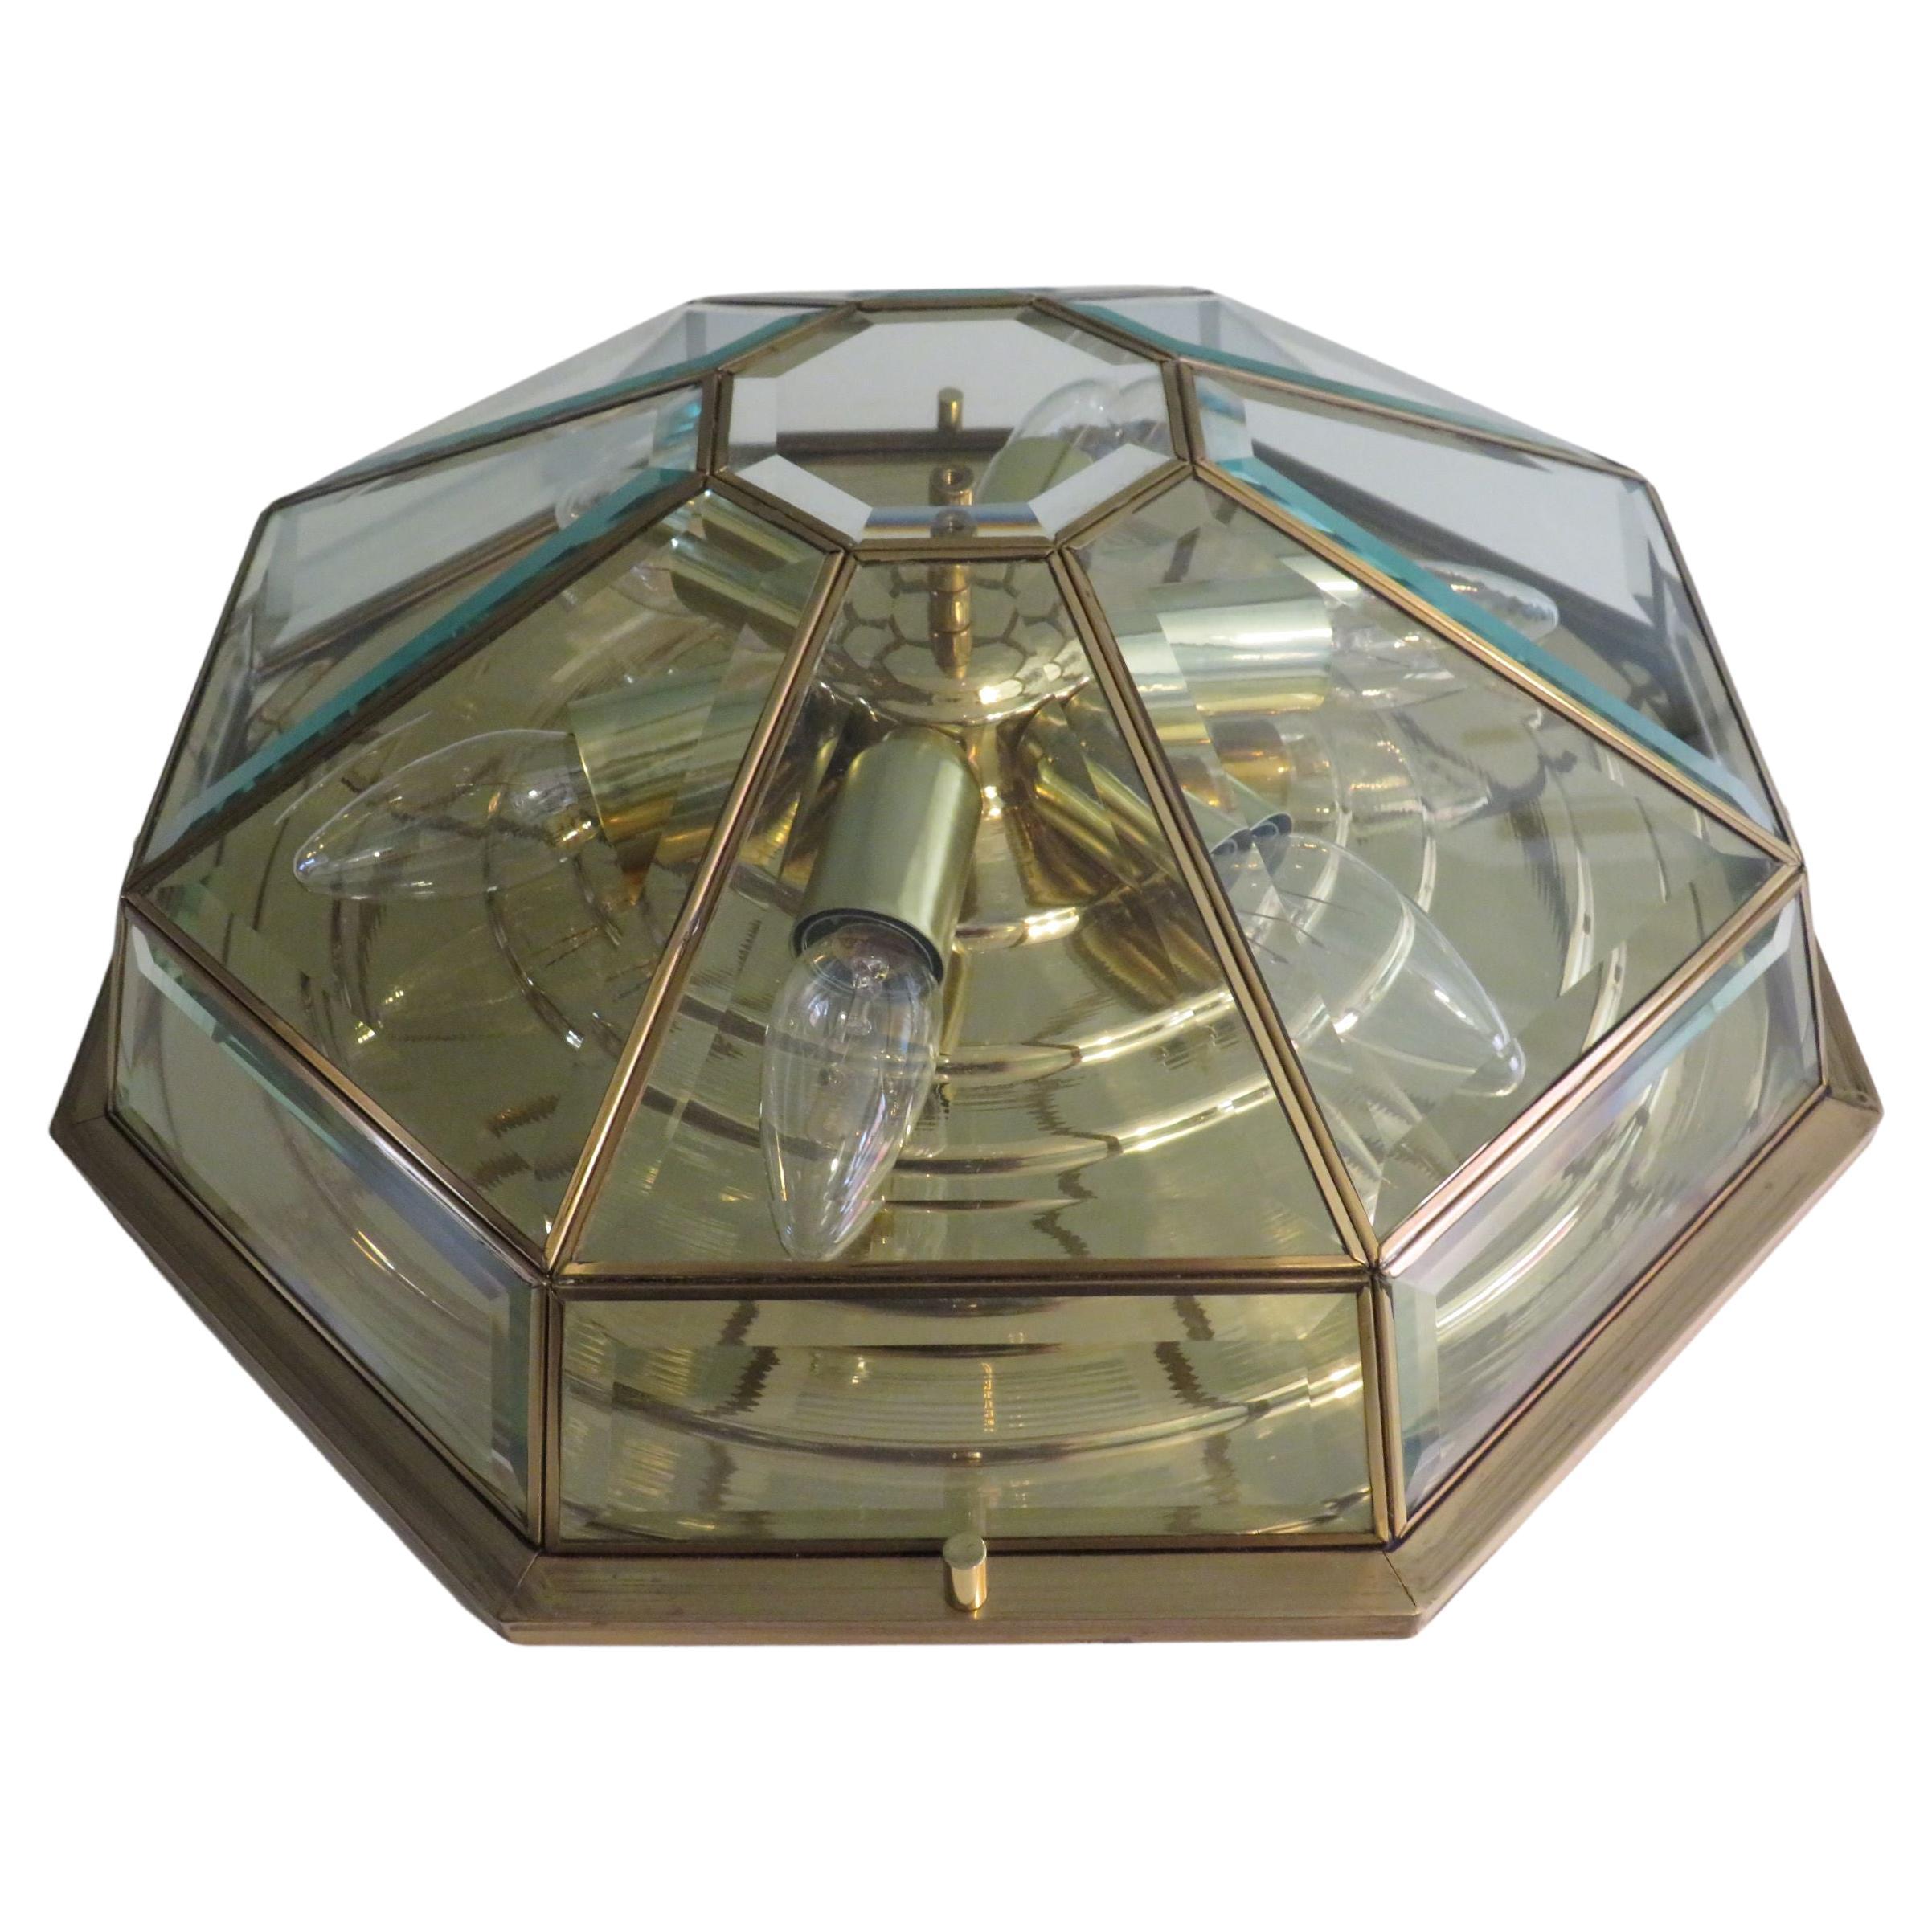 Large octagonal brass ceiling lamp with cut glass.
The item is equipped with 6 E 14 fittings and gives a pleasant light.
The item is in working and very good condition.
Height: 13.5 cm and length x depth 40.5 cm x 40.5 cm.
The ceiling lamp is marked